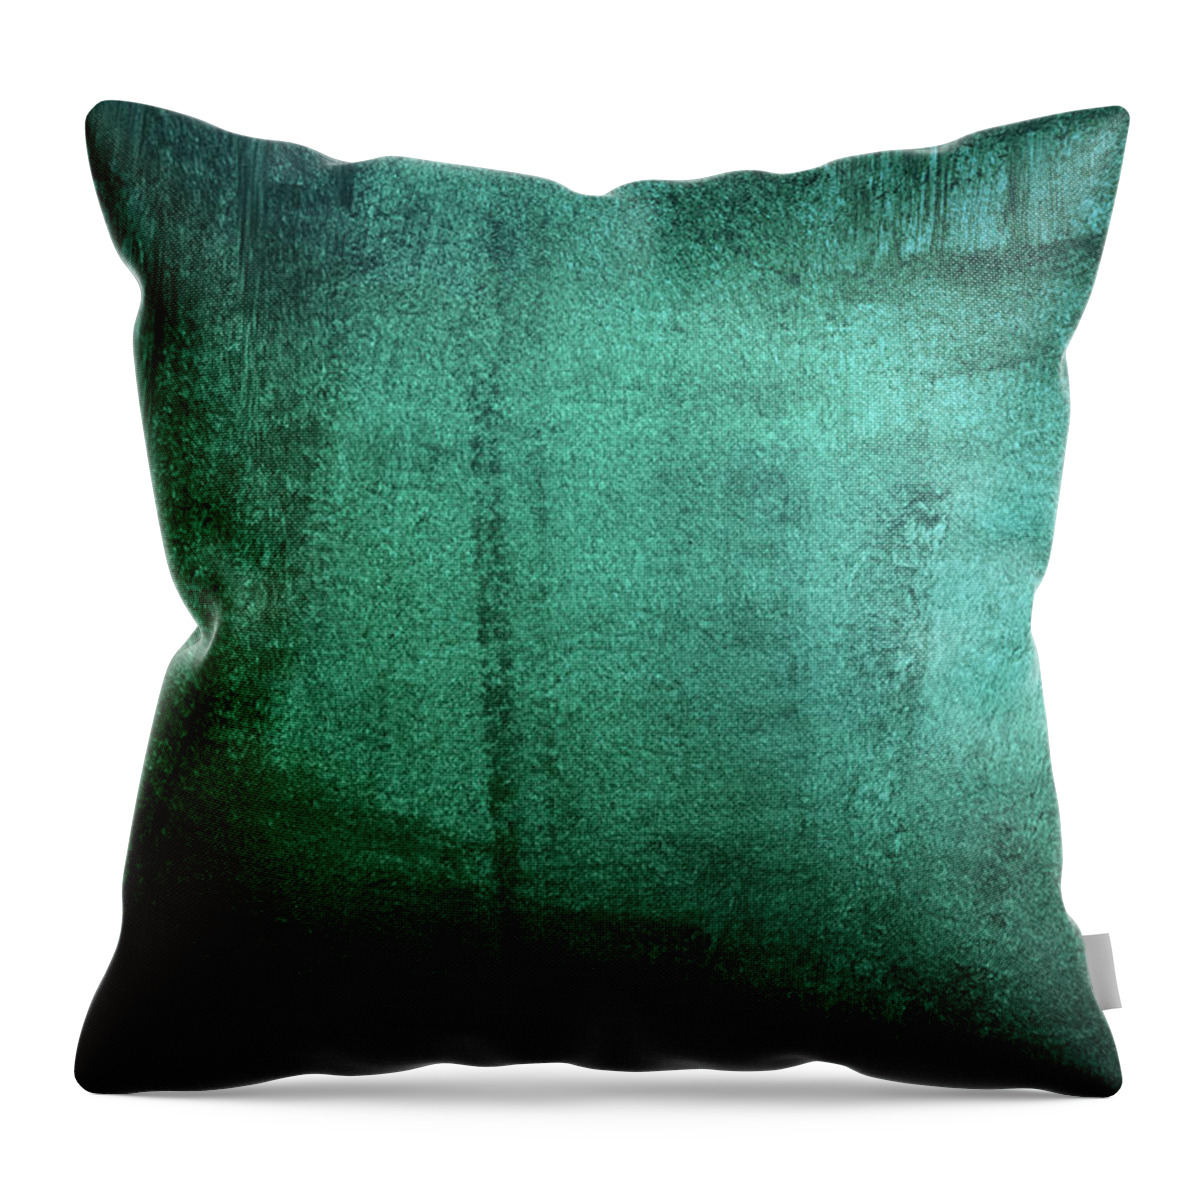 Cool Attitude Throw Pillow featuring the photograph Green Grunge Background by Caracterdesign